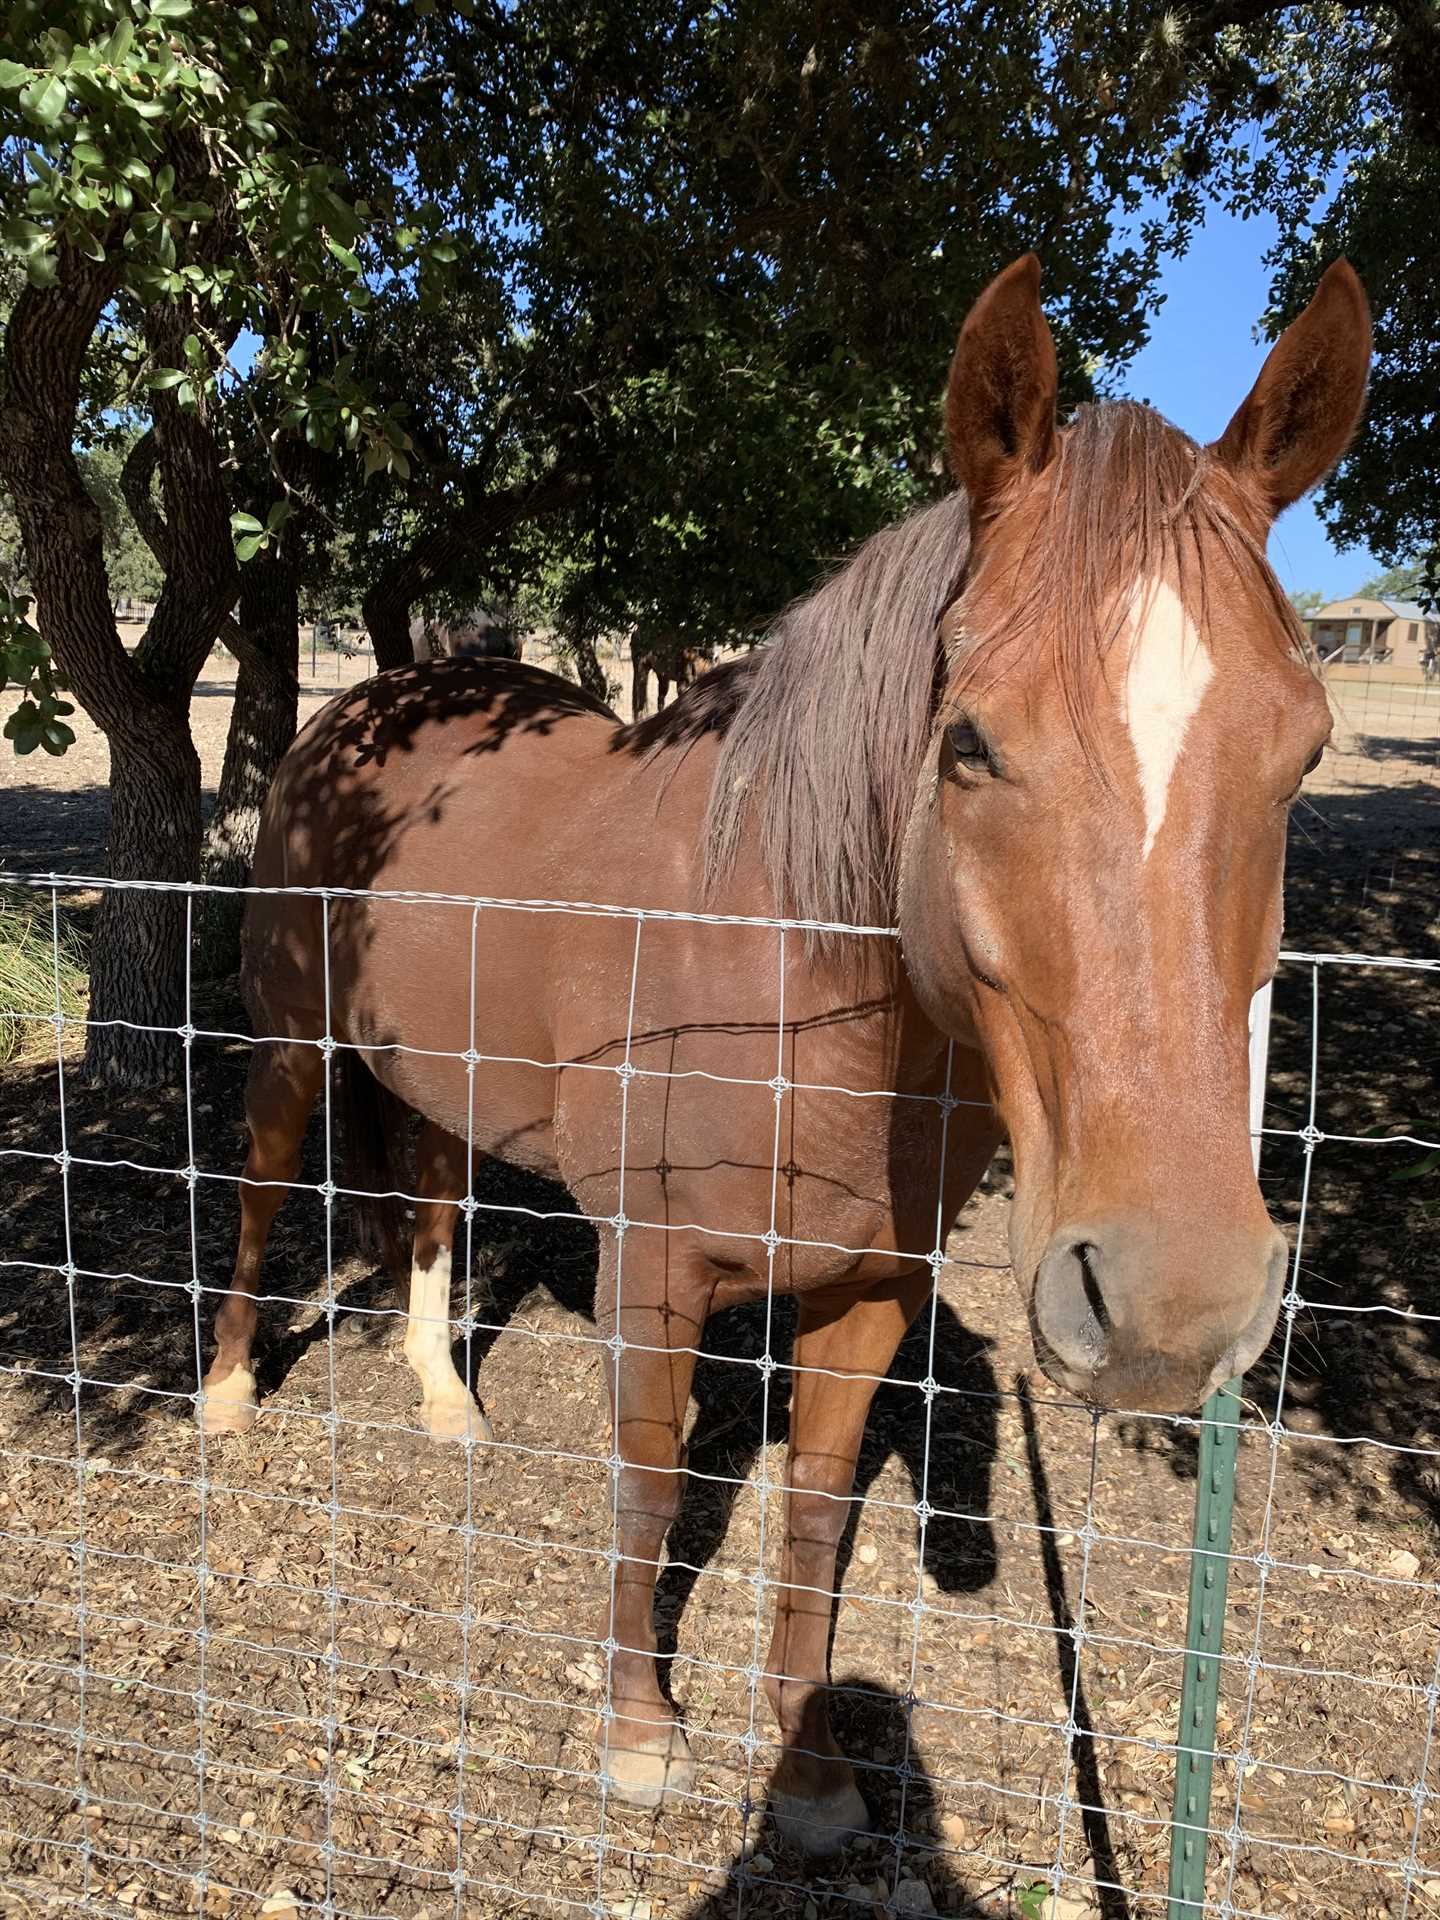                                                 Tabasco Ranch has several horses on-site, and you can also bring your own! Check with us for details if that interests you.